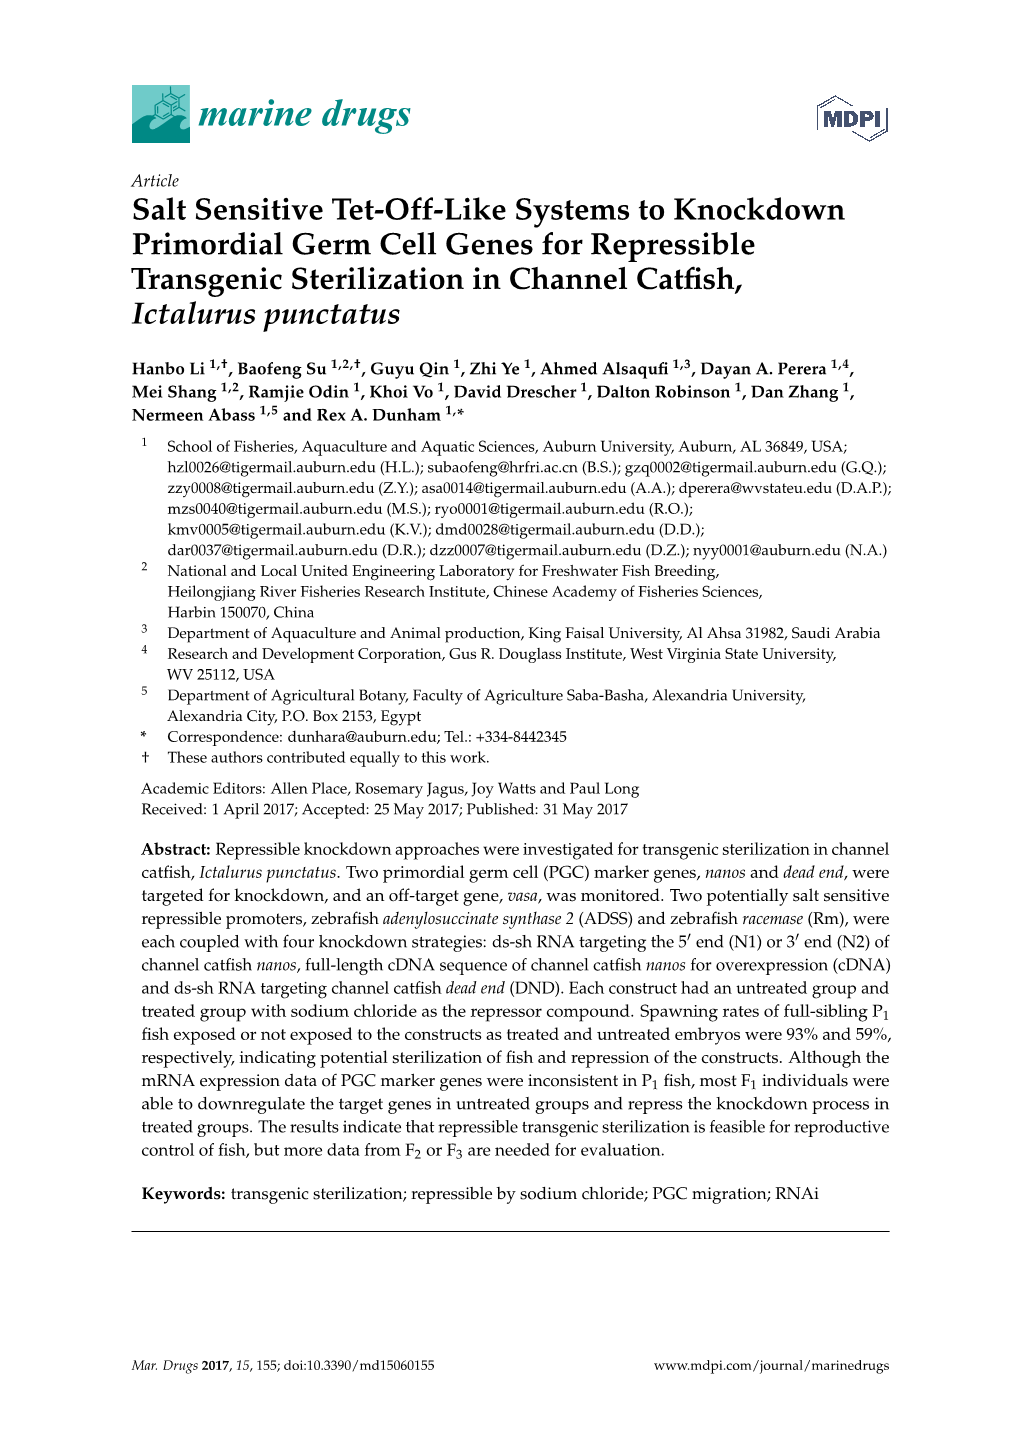 Salt Sensitive Tet-Off-Like Systems to Knockdown Primordial Germ Cell Genes for Repressible Transgenic Sterilization in Channel Catﬁsh, Ictalurus Punctatus